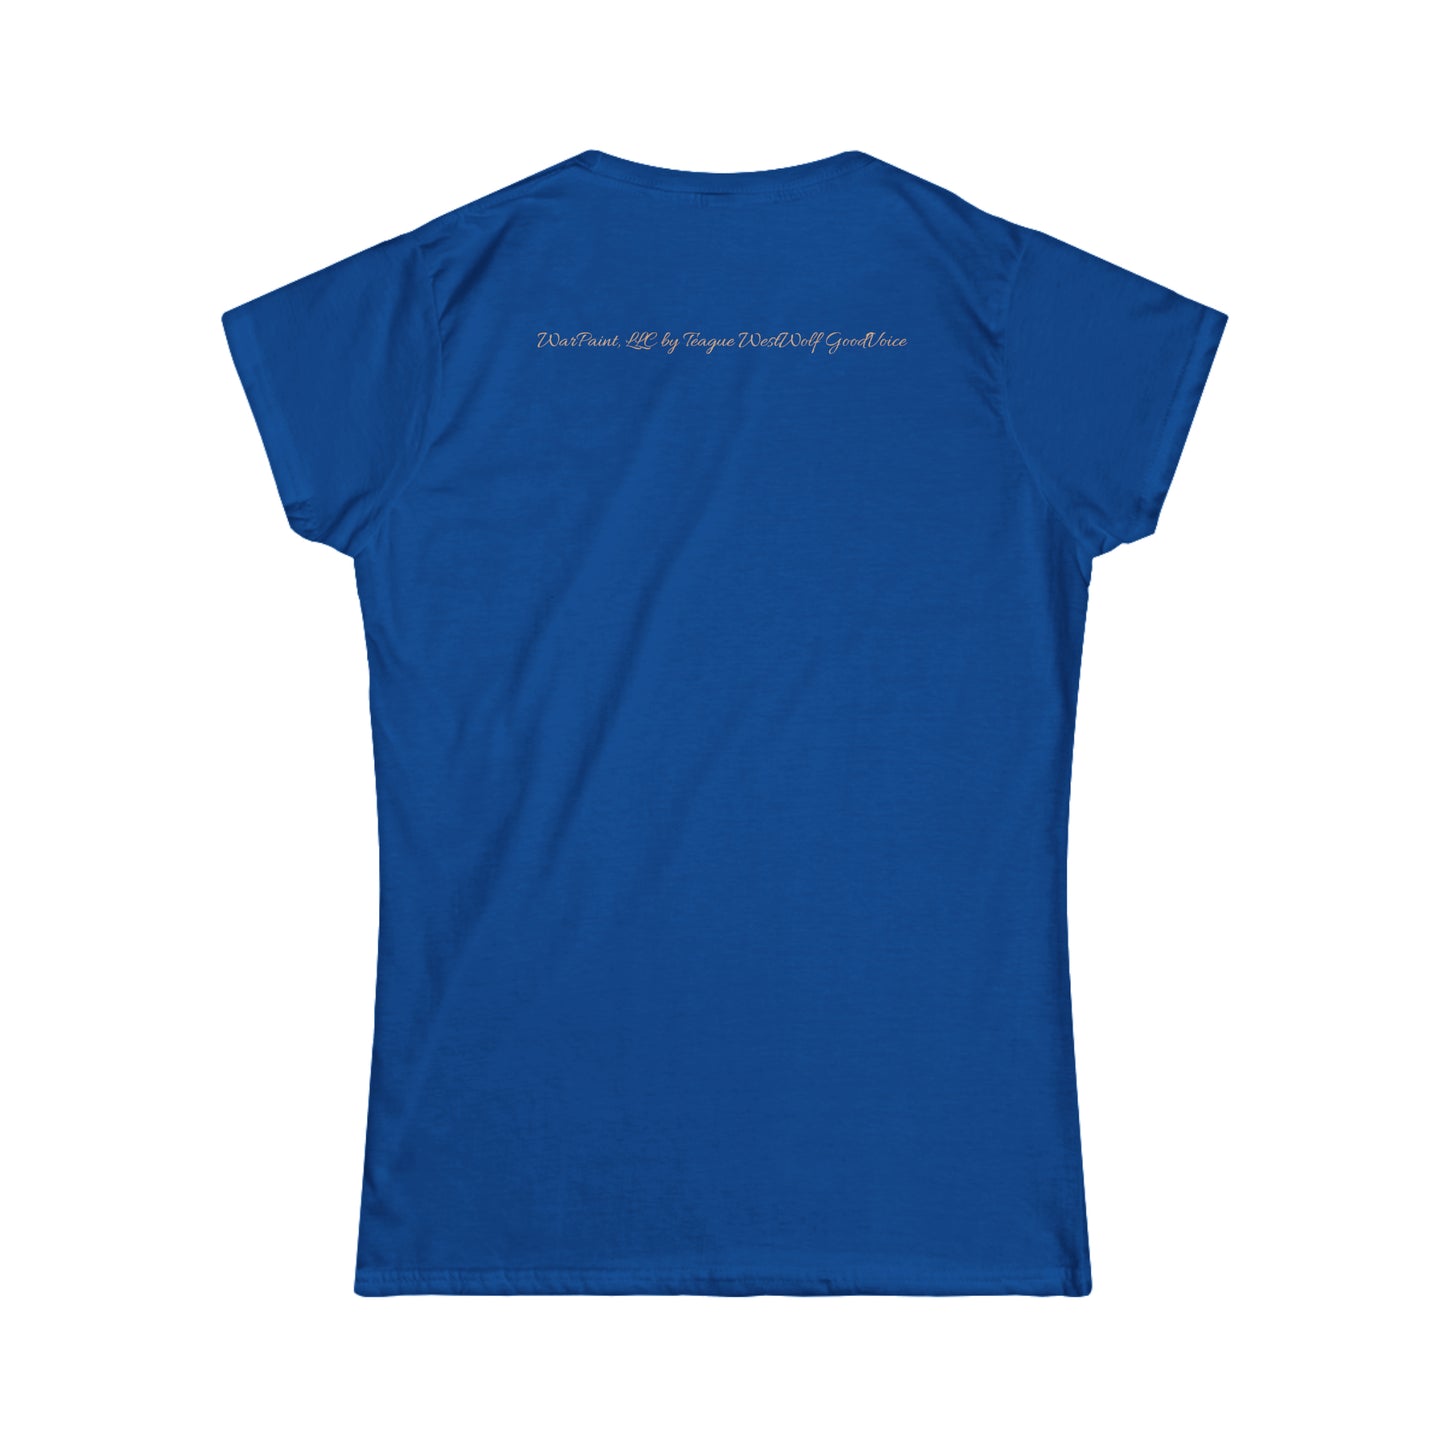 When it Doubt, Smudge it Out - Women's Softstyle Tee